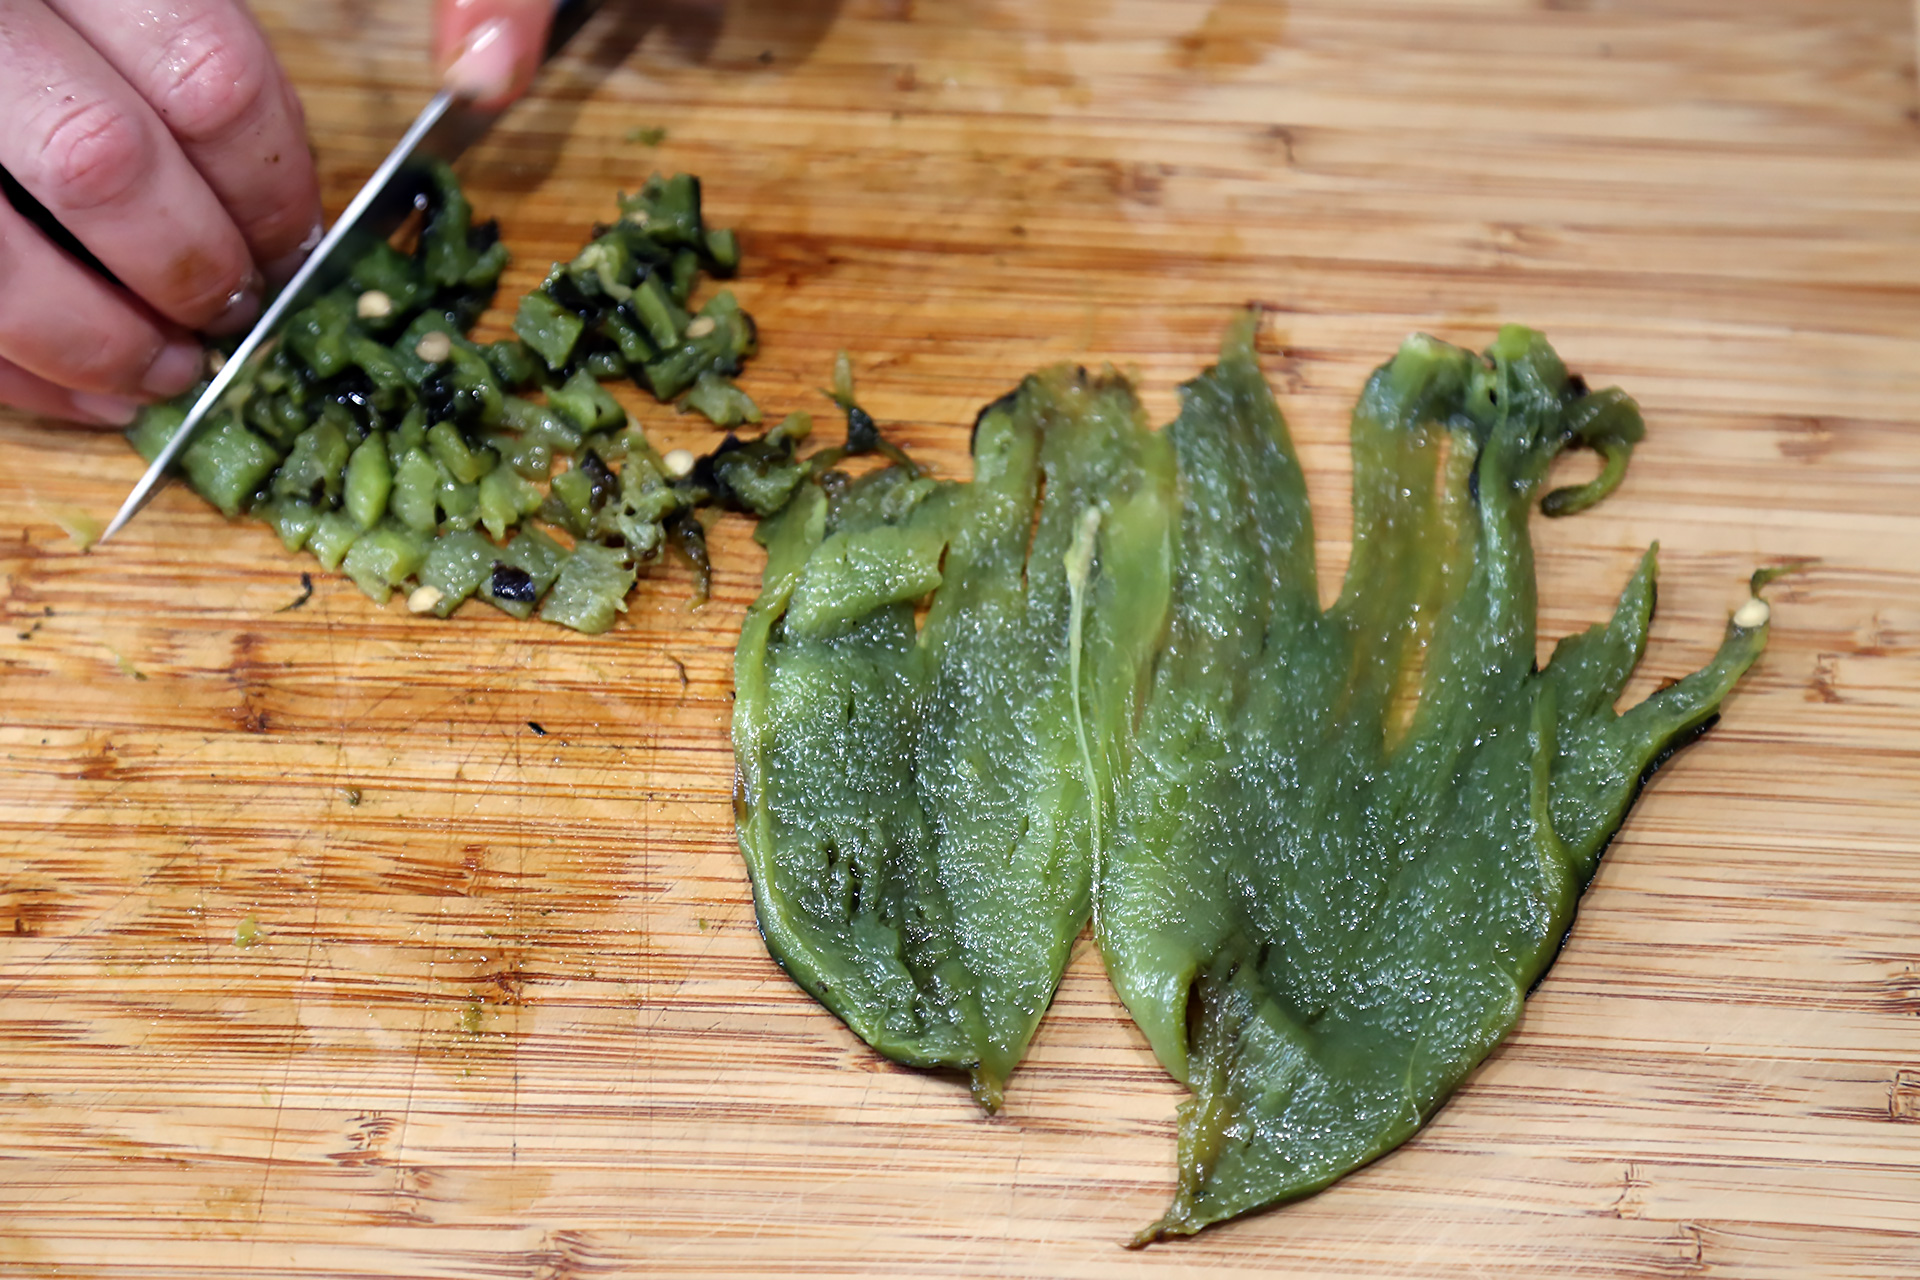 Remove and discard the stem, skin, and seeds, then finely dice the poblano.